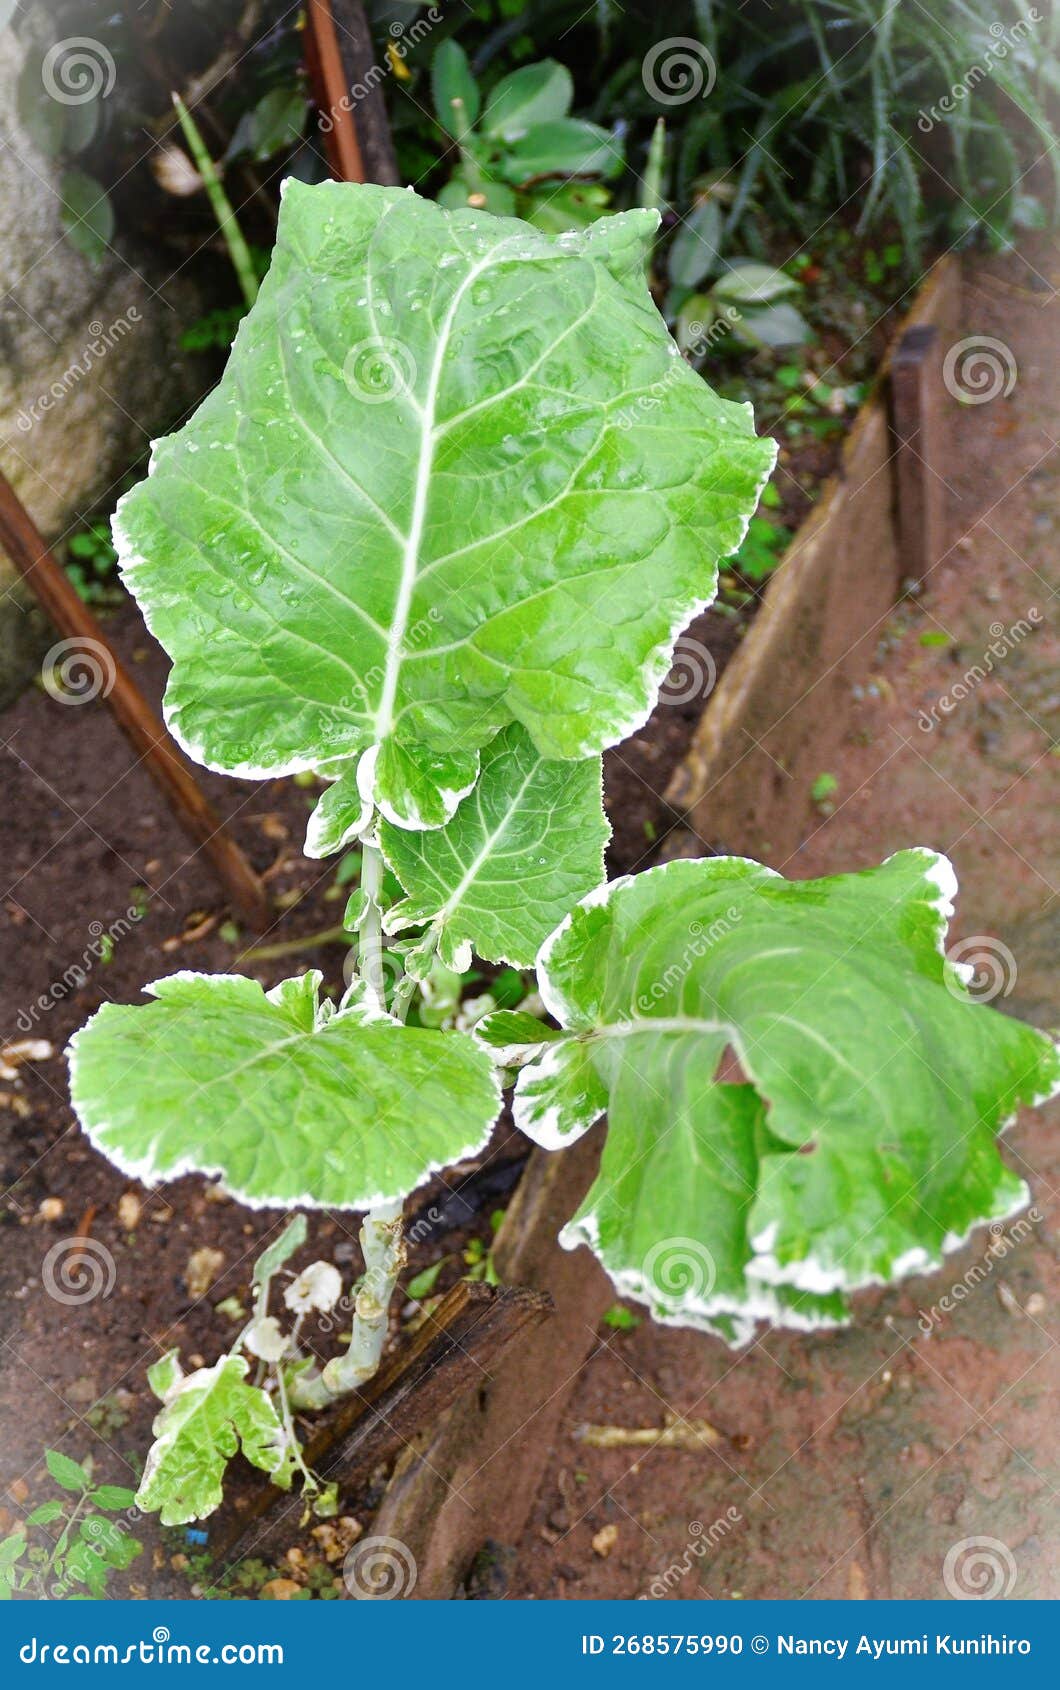 in the garden the variegated cabbage growing